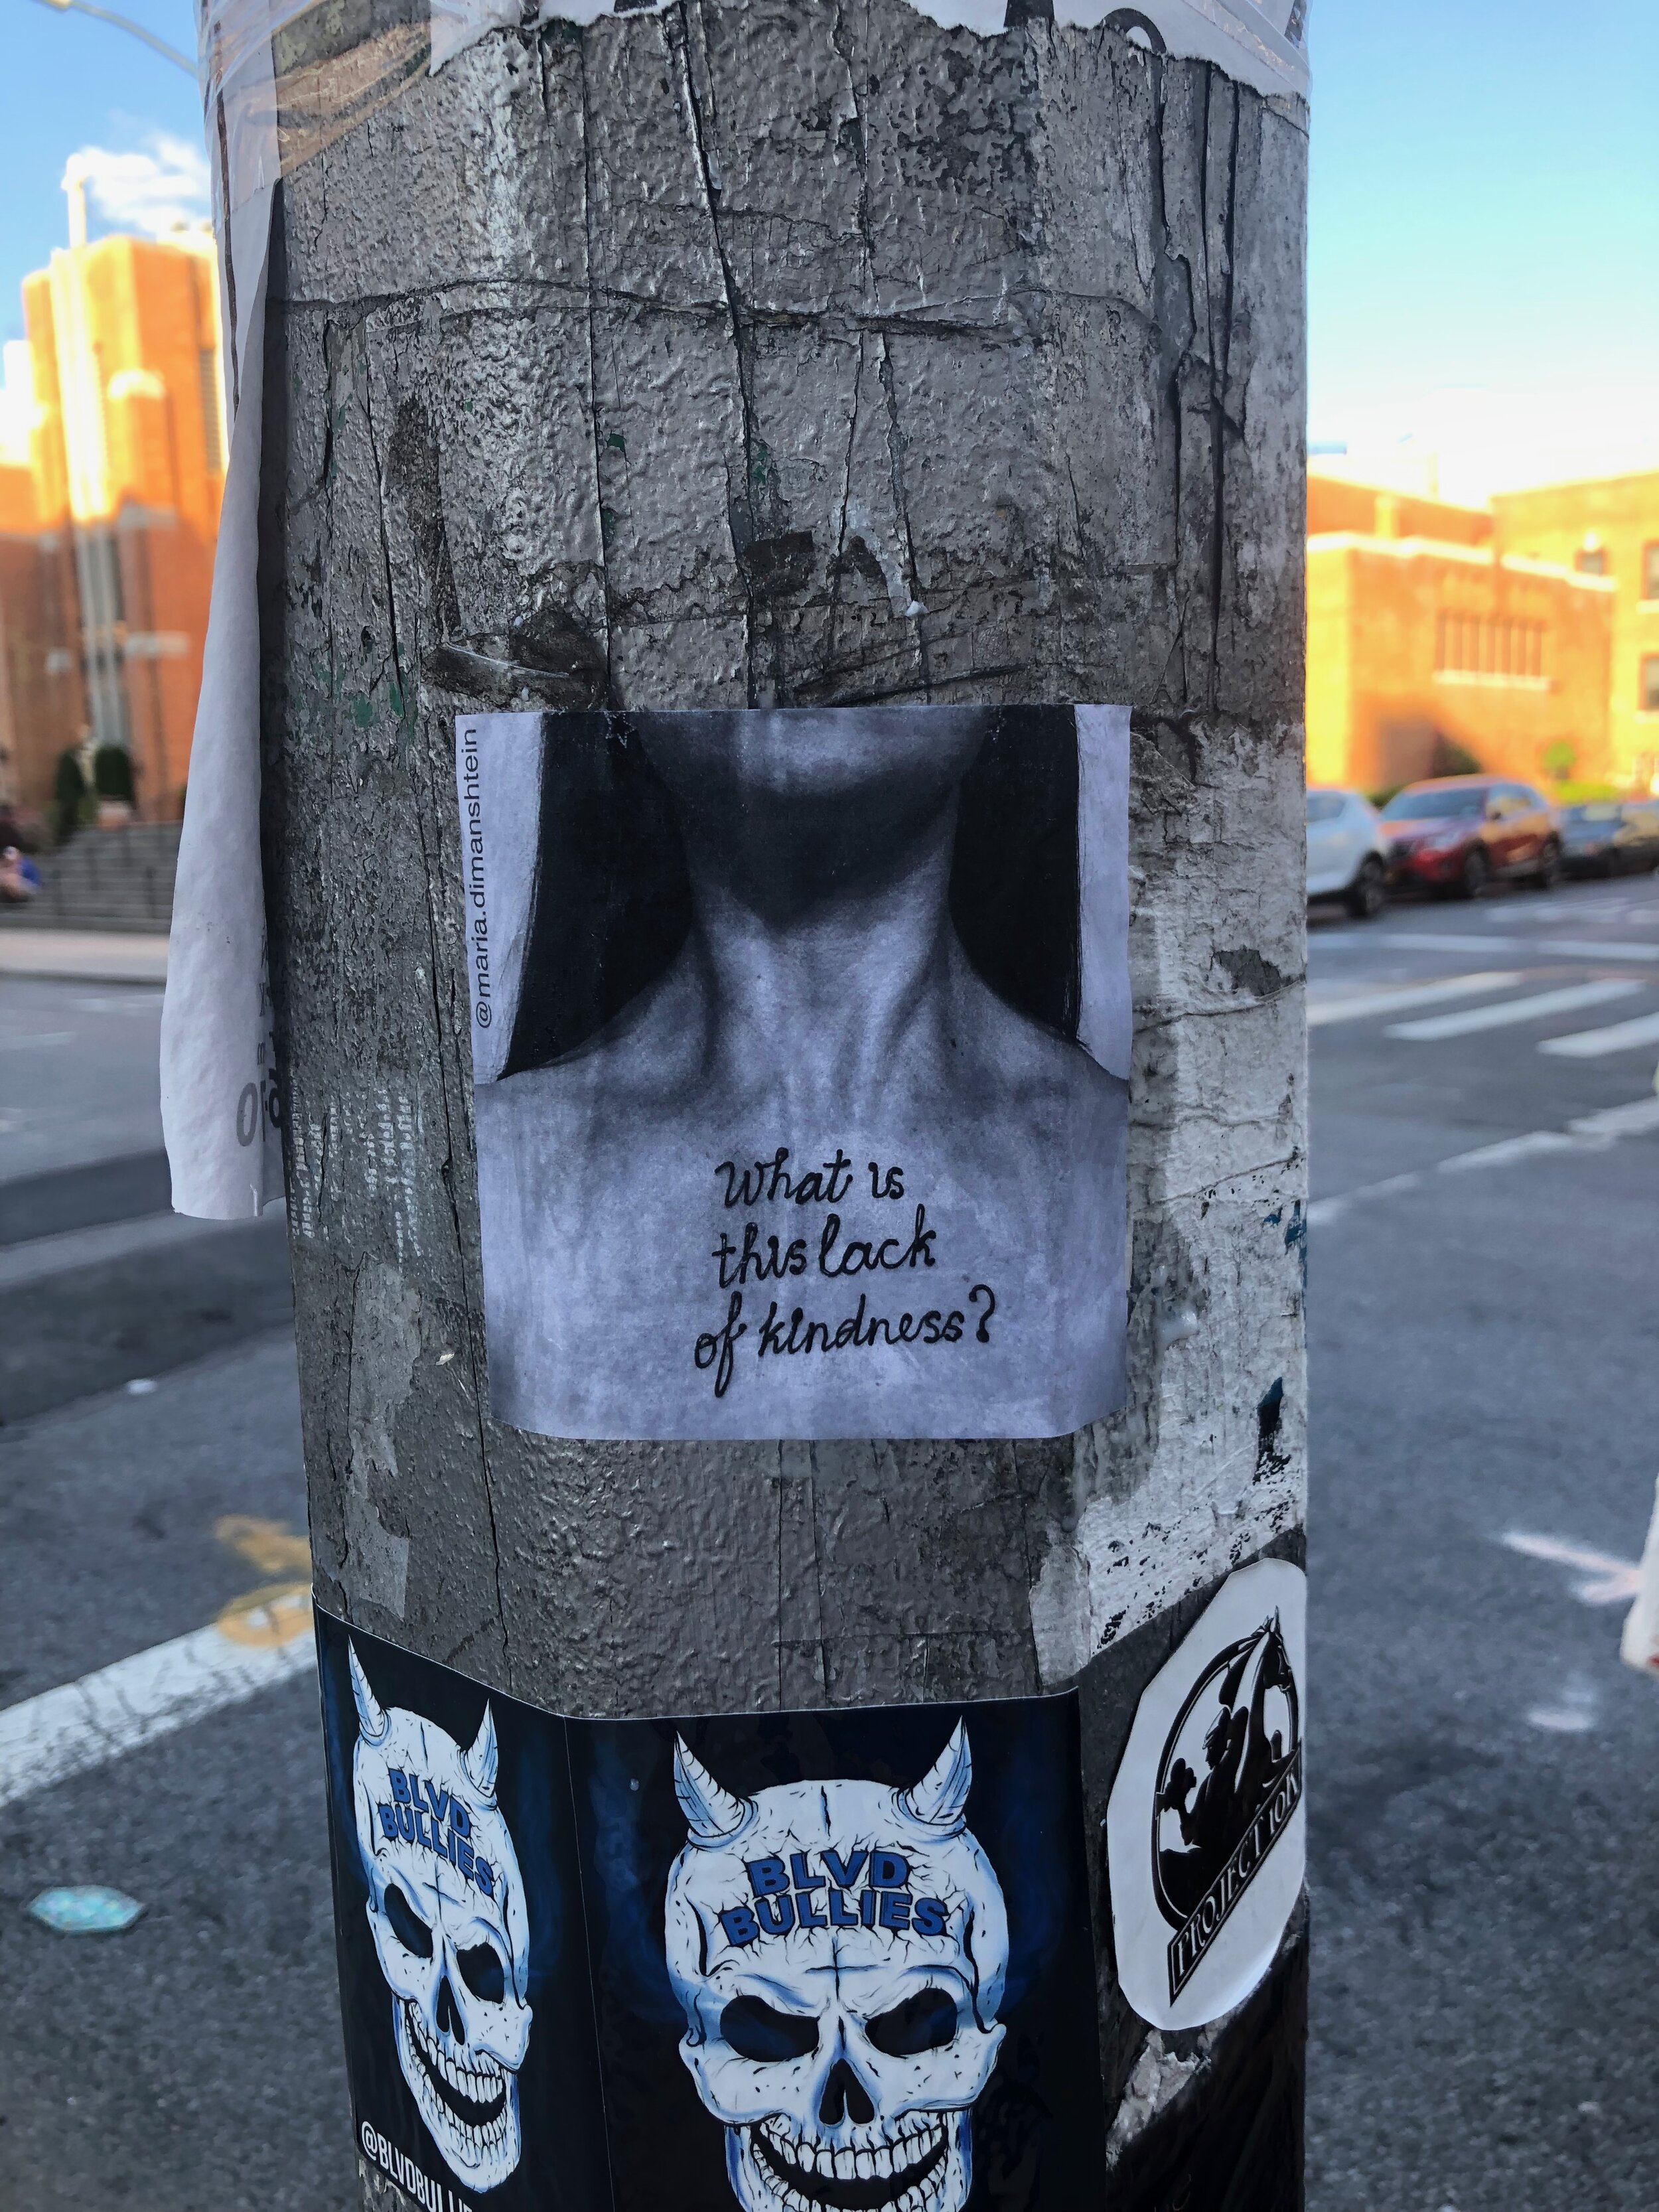 Pasteups on the streets of Brooklyn